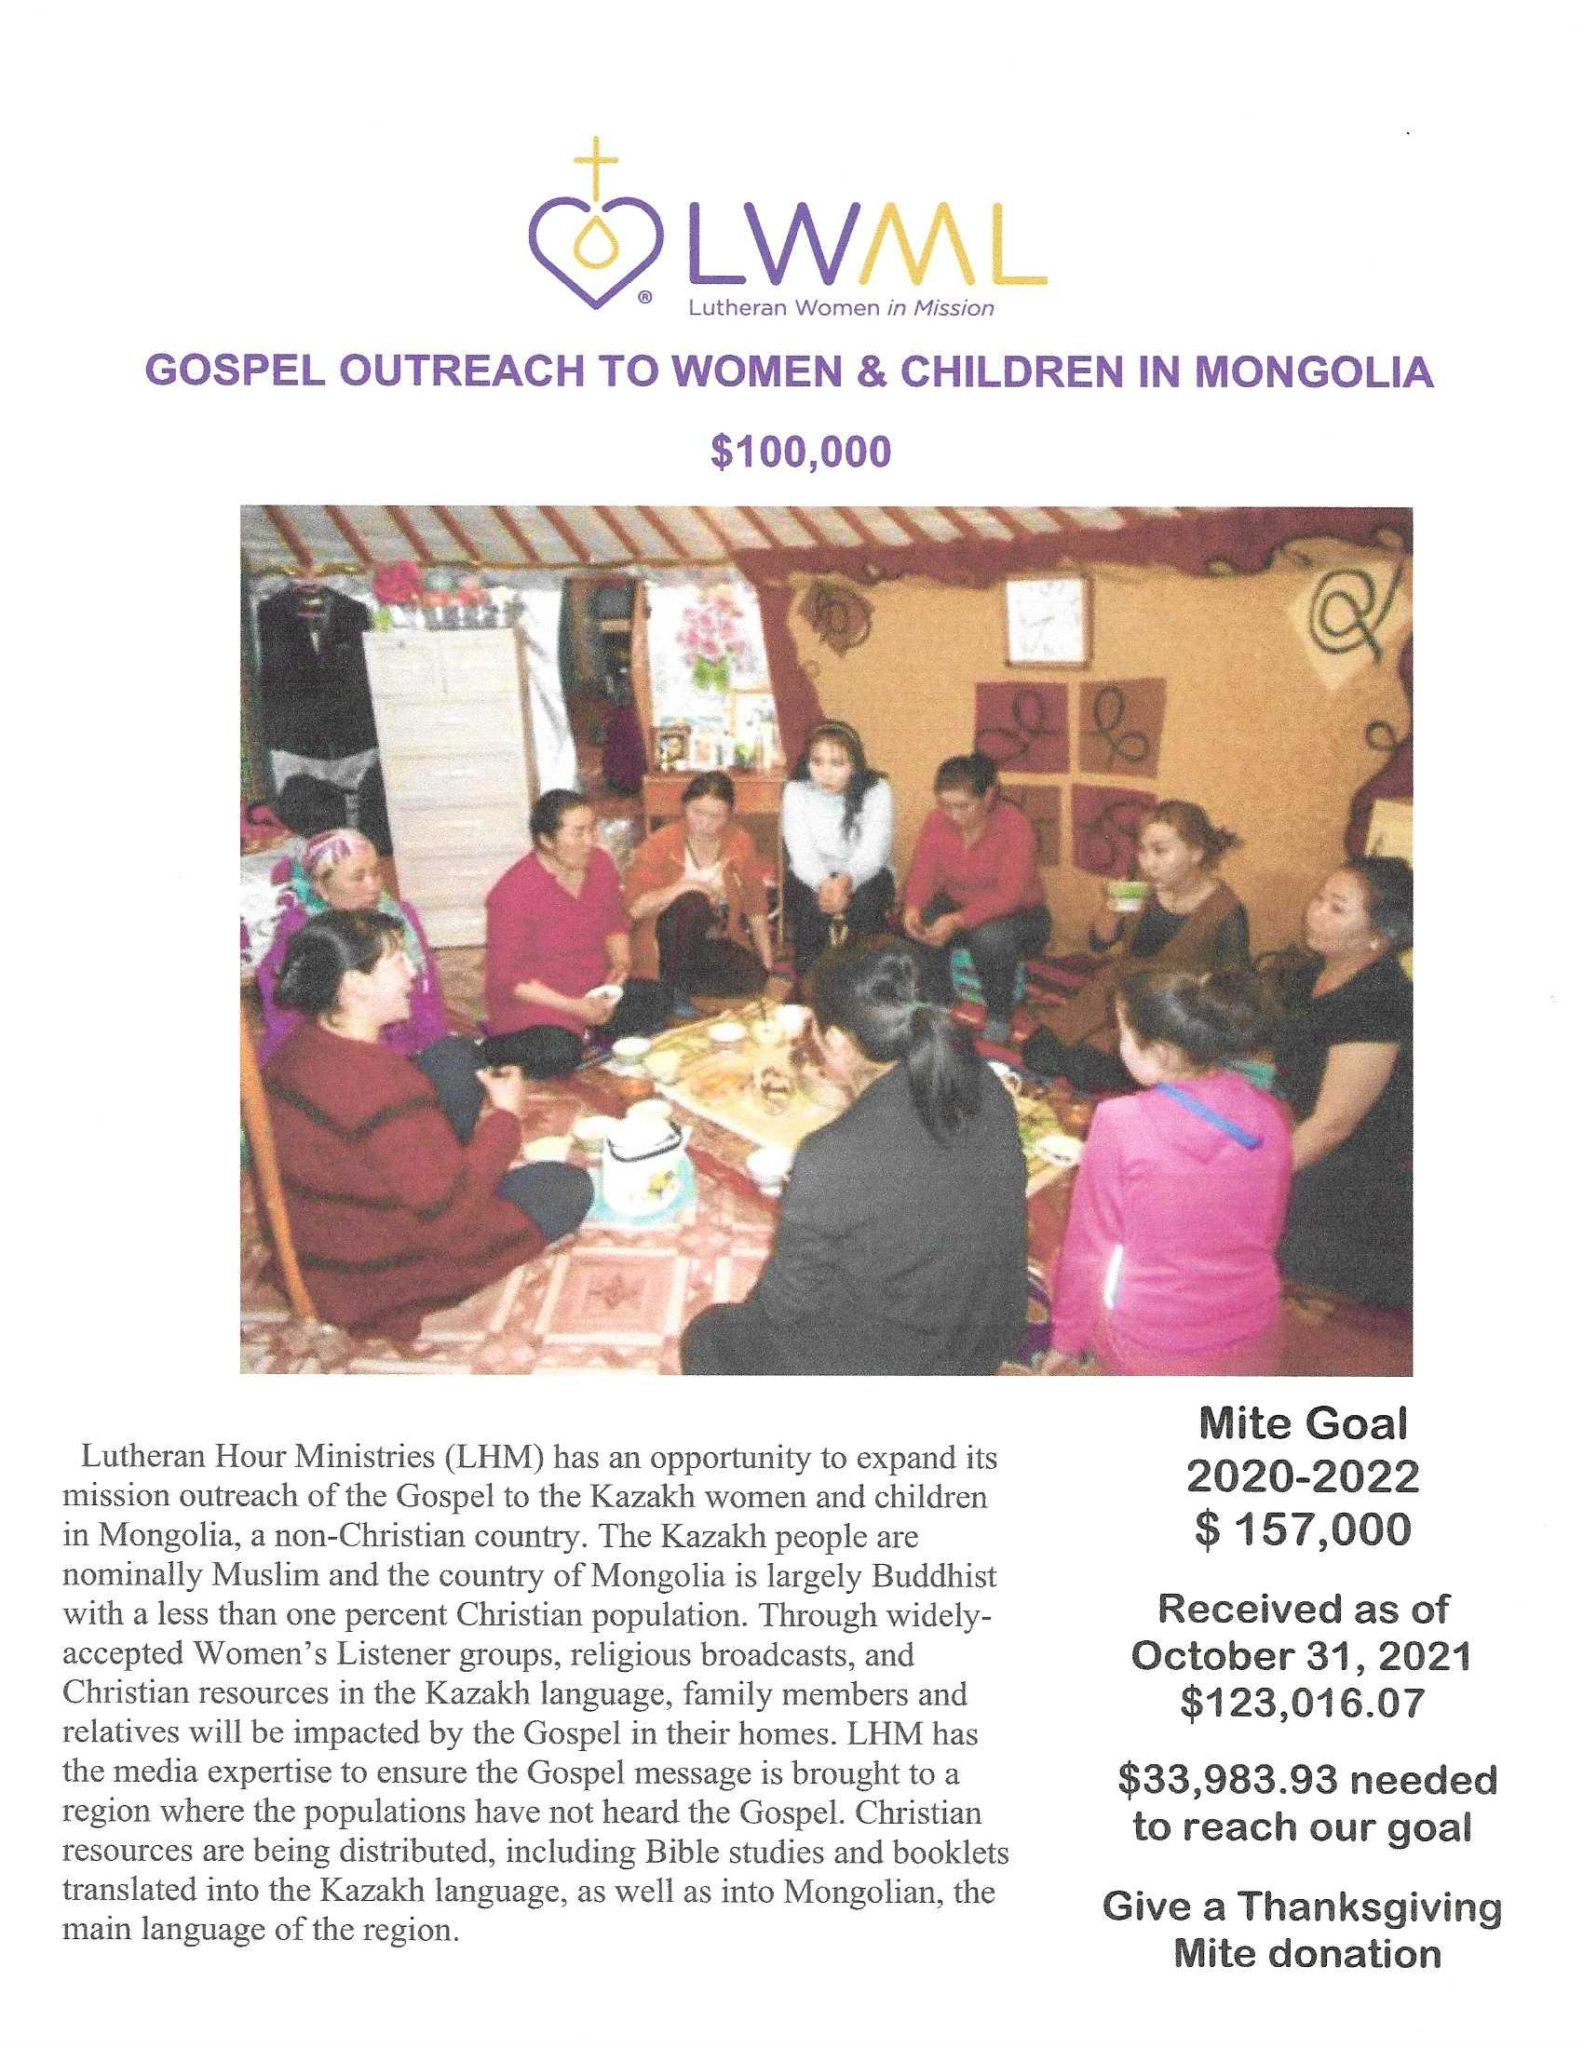 LWML NID mission grant poster for October 2021